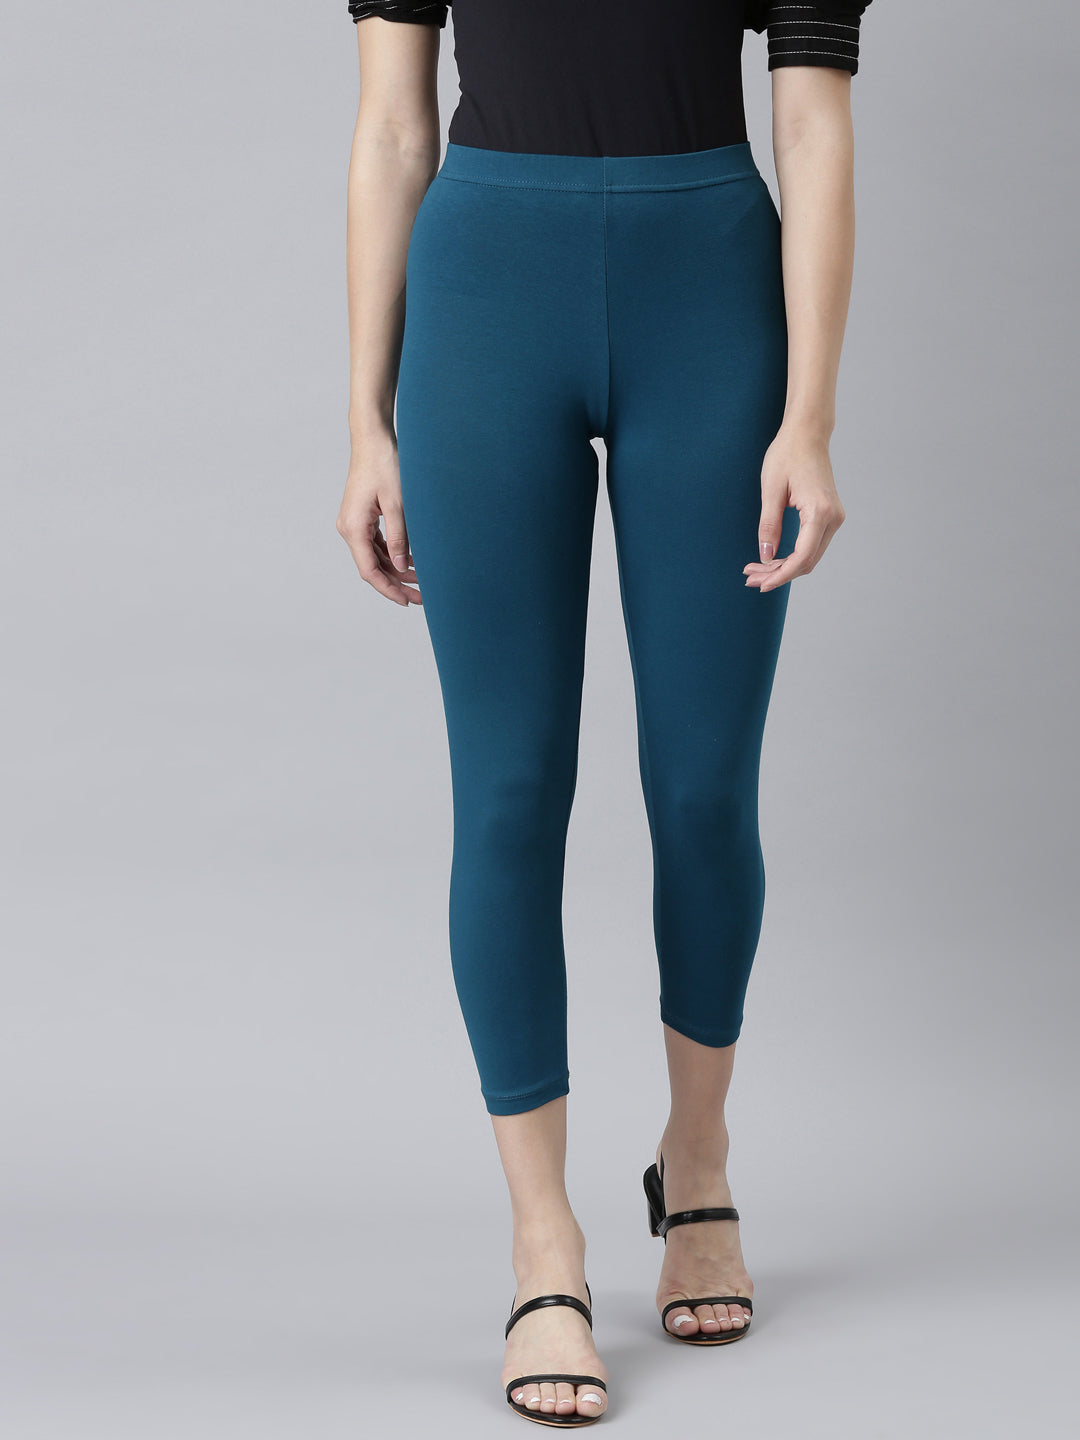 Go Colors Women Solid Cotton Cropped Leggings (Size - S, Navy) in Mumbai at  best price by Naigara Dresses - Justdial